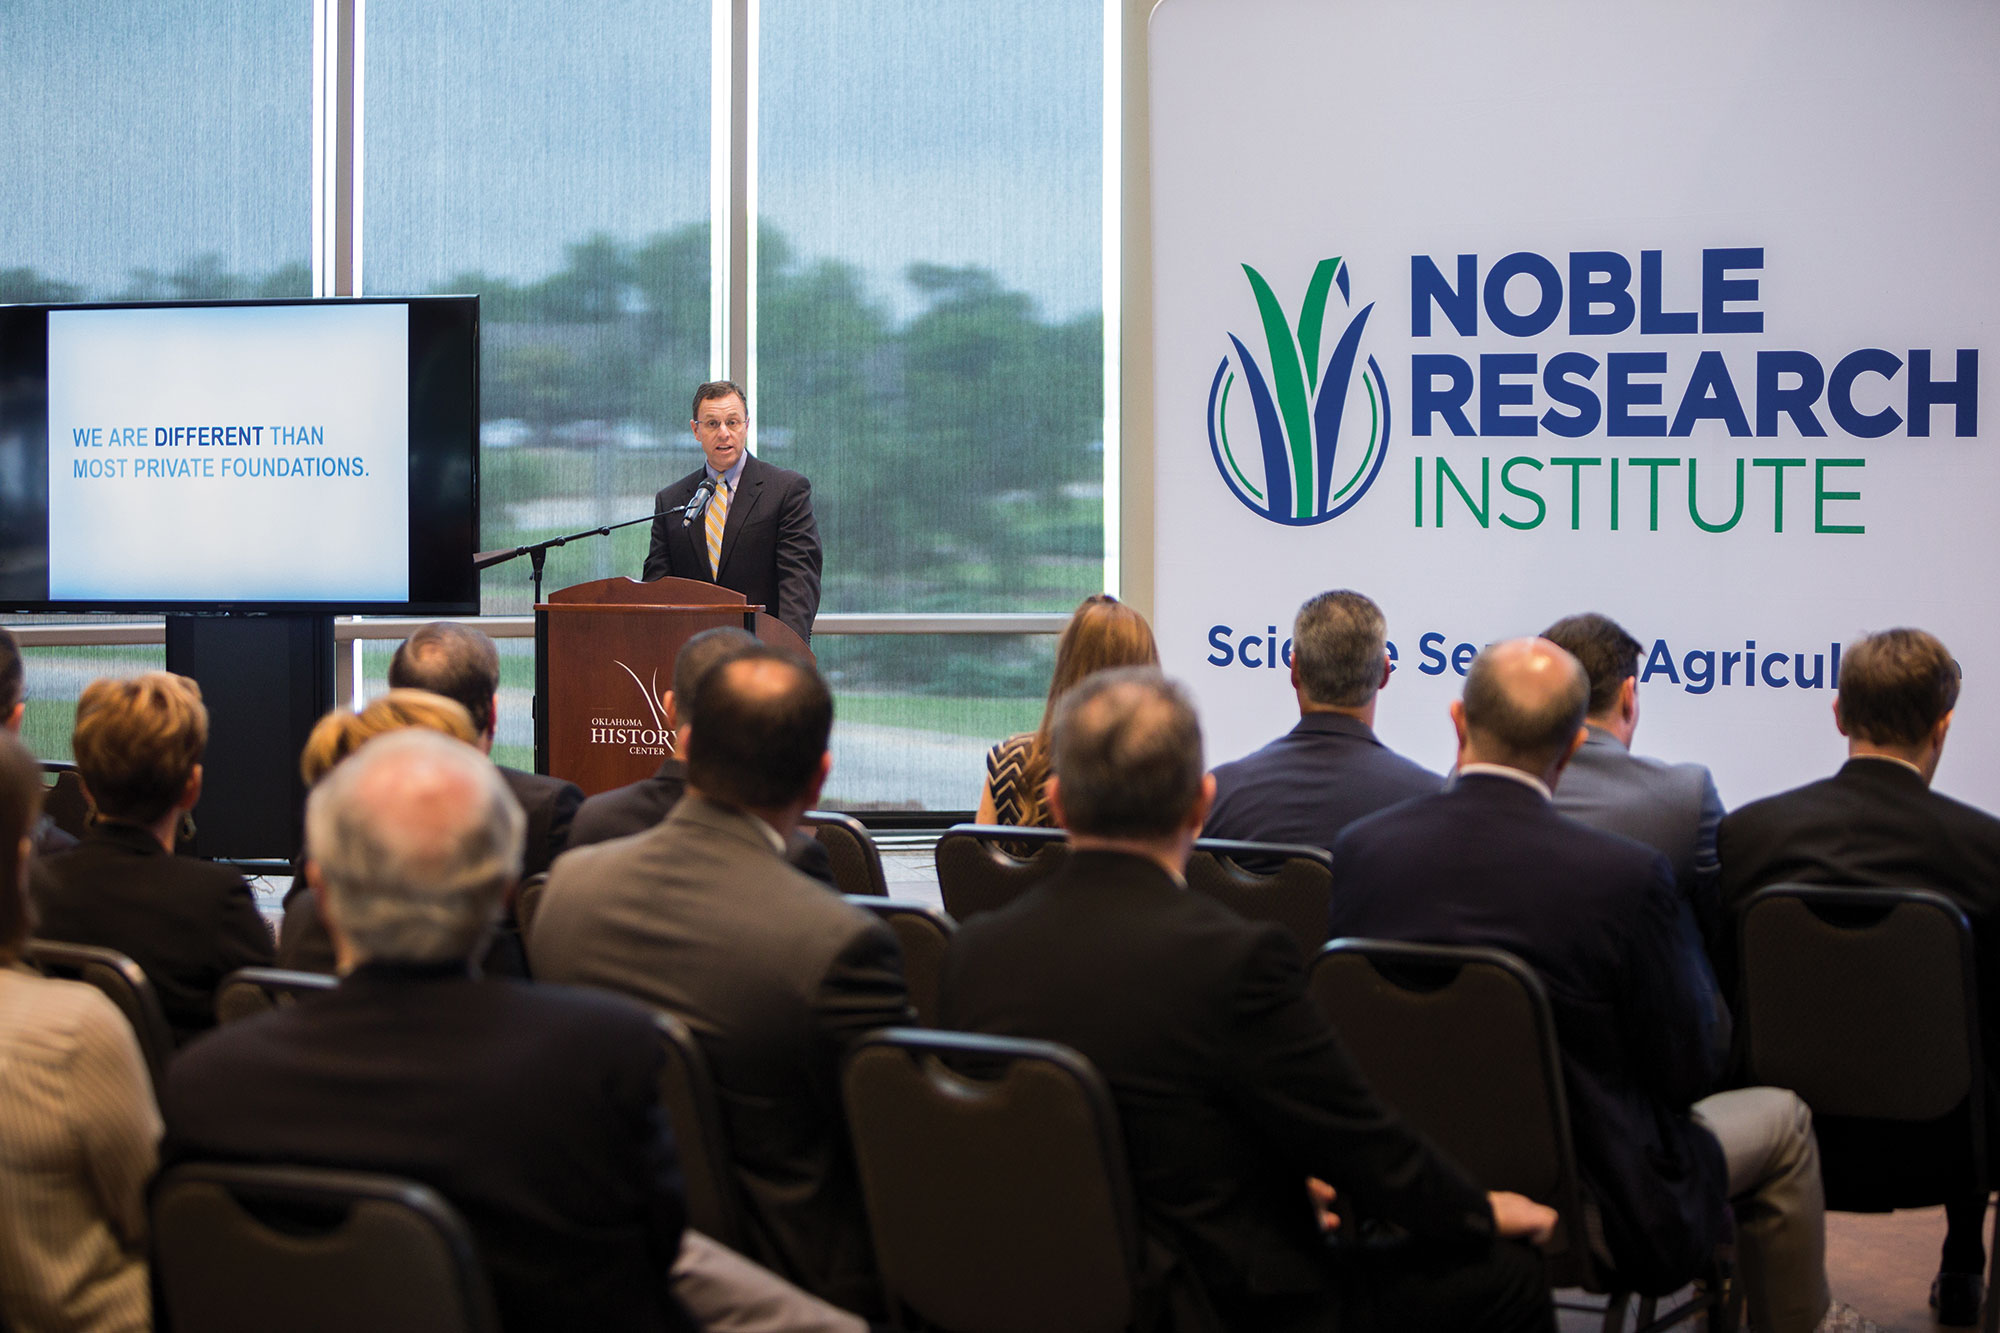 Steve Rhines explains how a public charity more closely aligns with the operations of the Noble Research Institute.